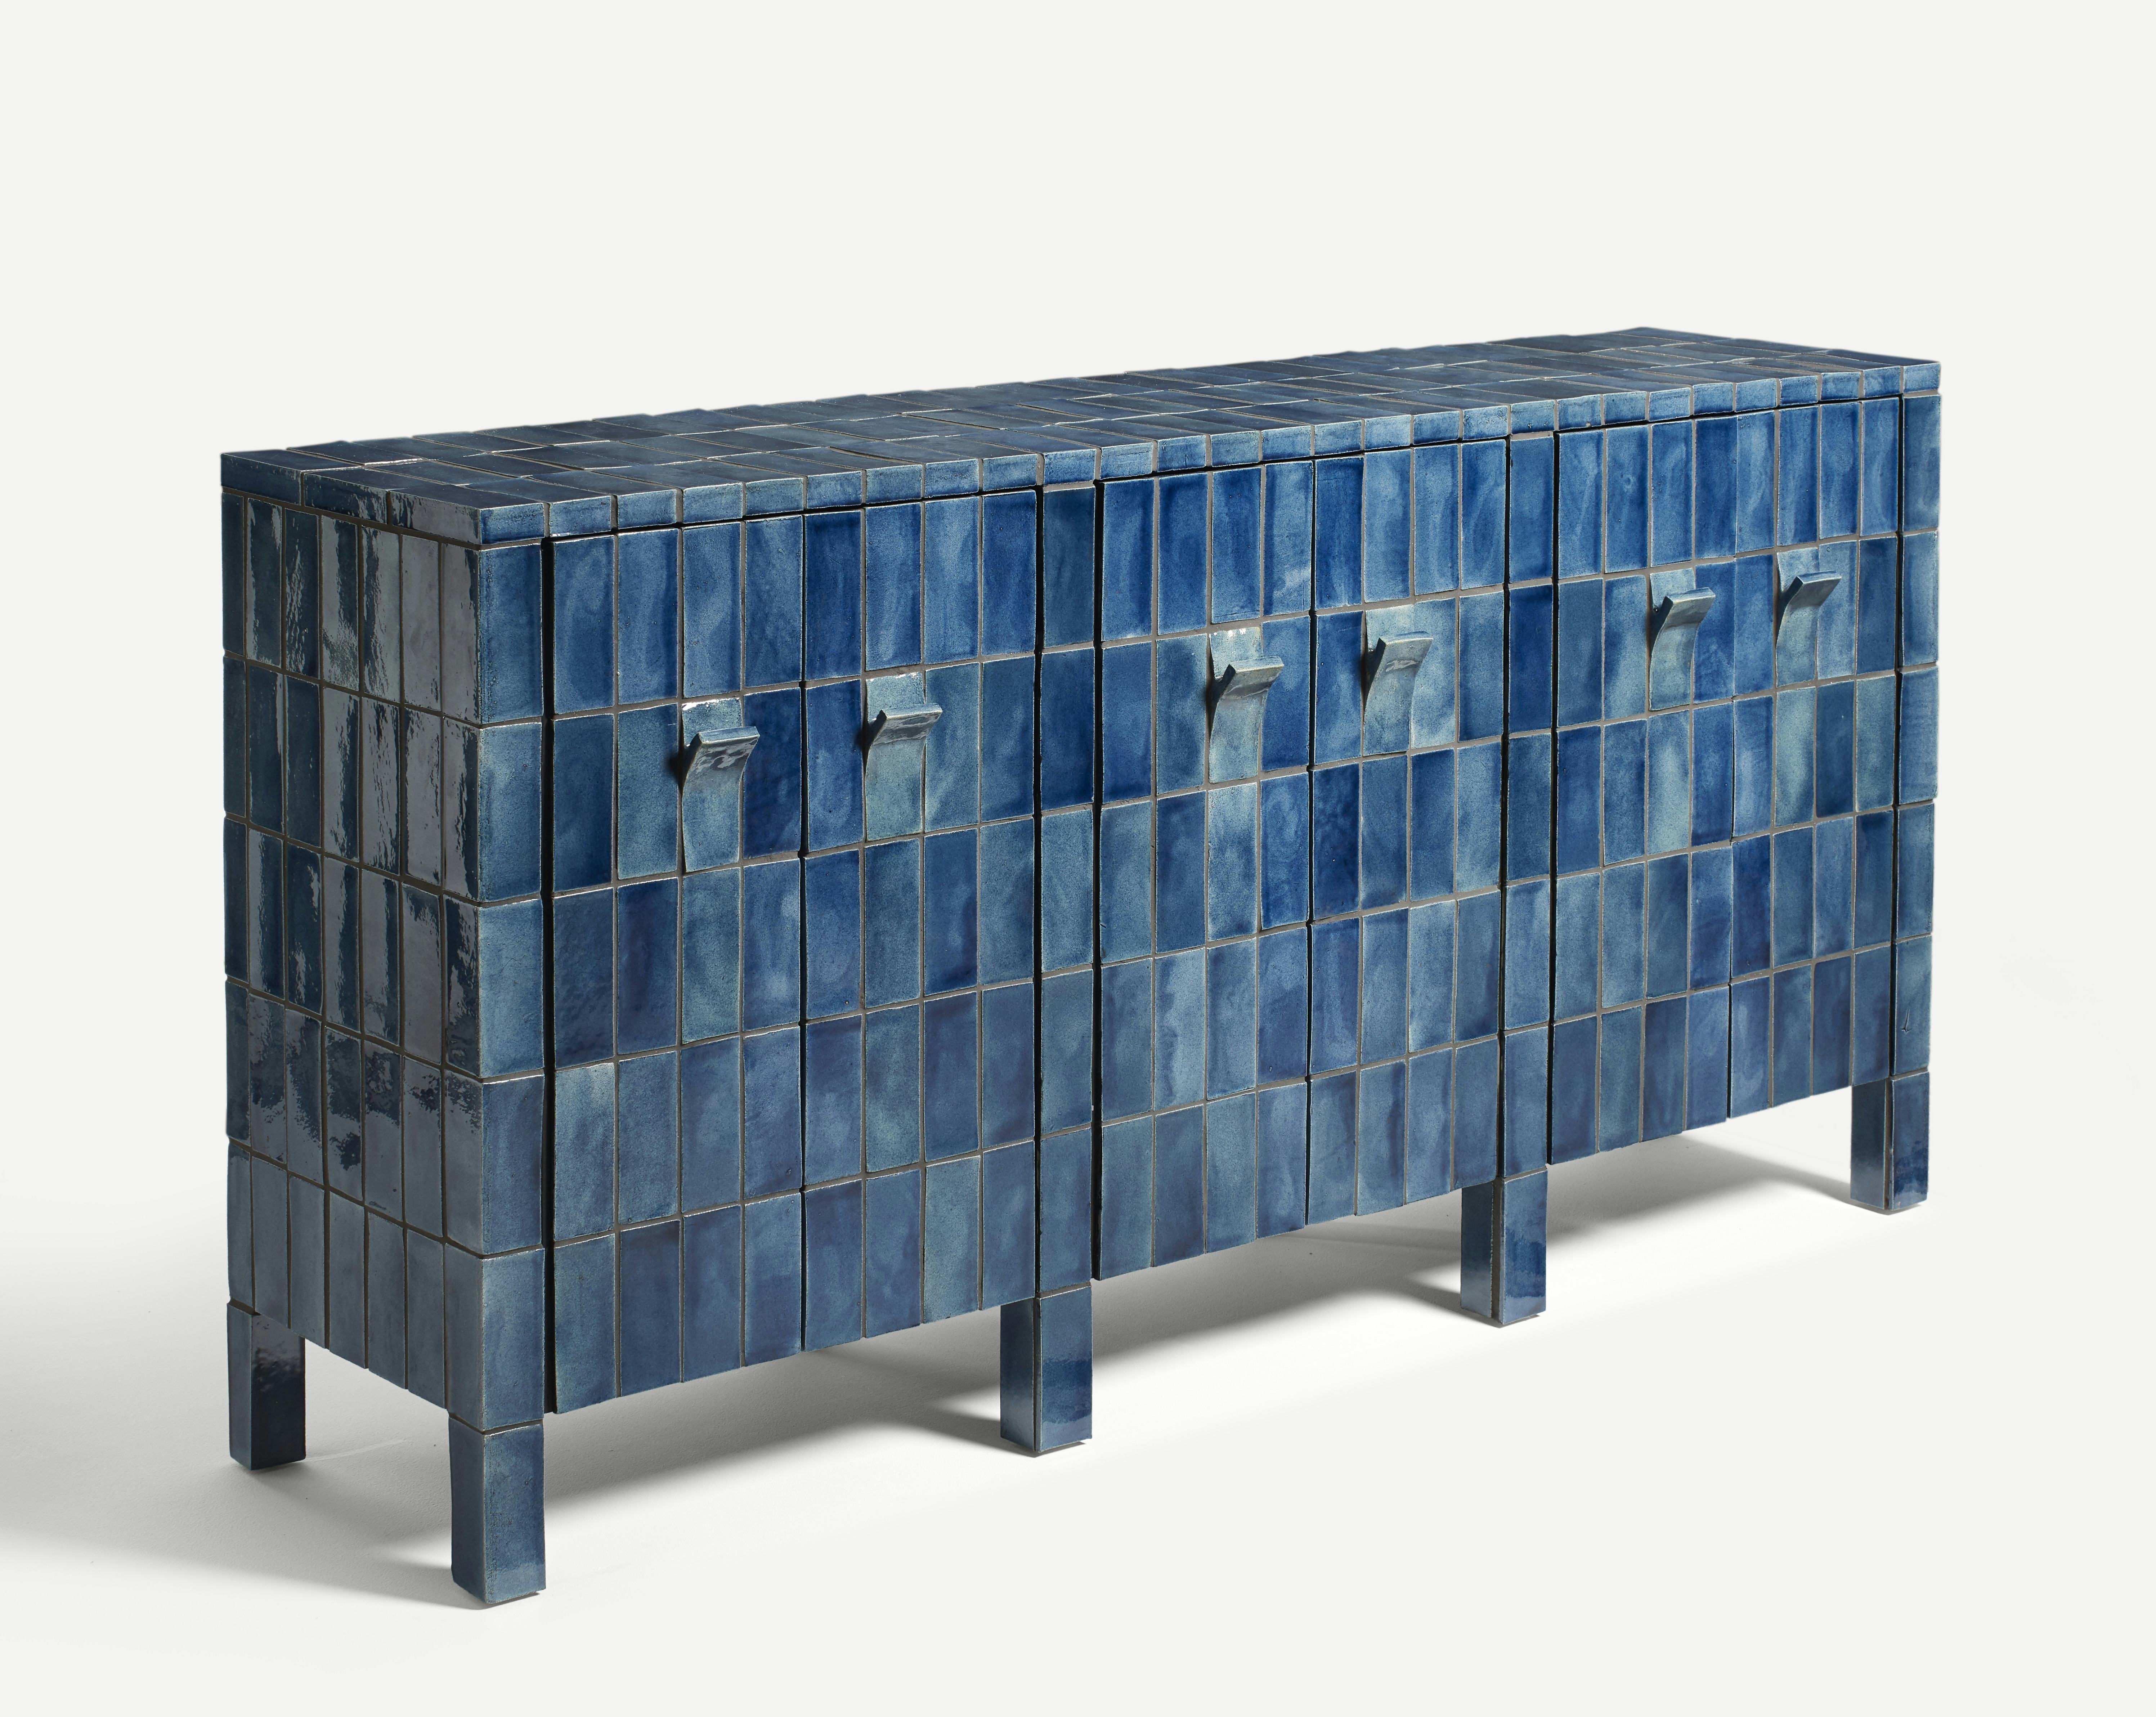 A sideboard clad in handmade blue tiles